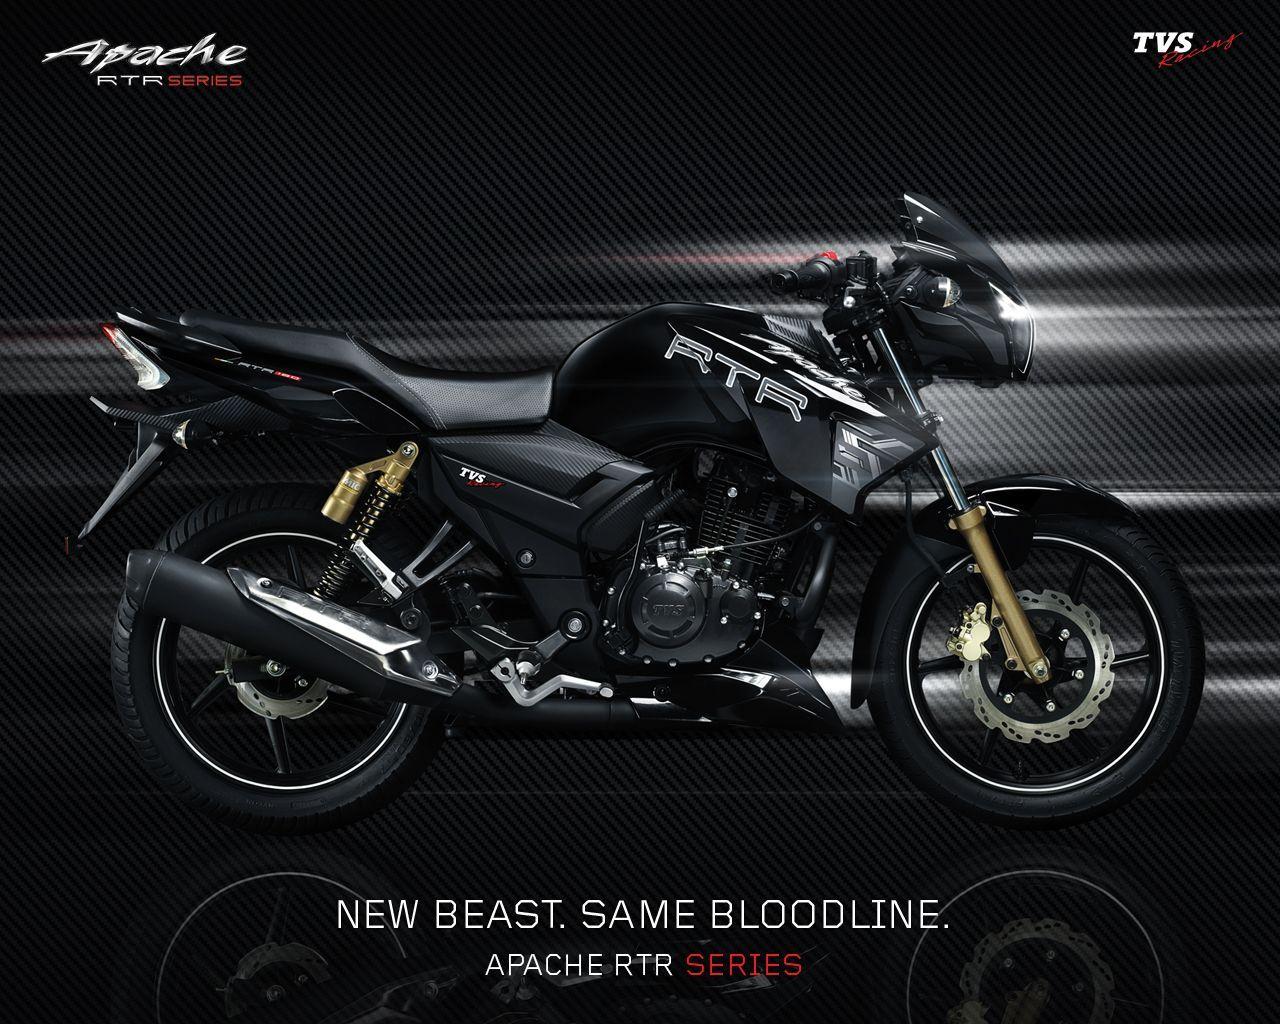 Tvs Apache RTR 180 2019 Model Wallpapers - Wallpaper Cave